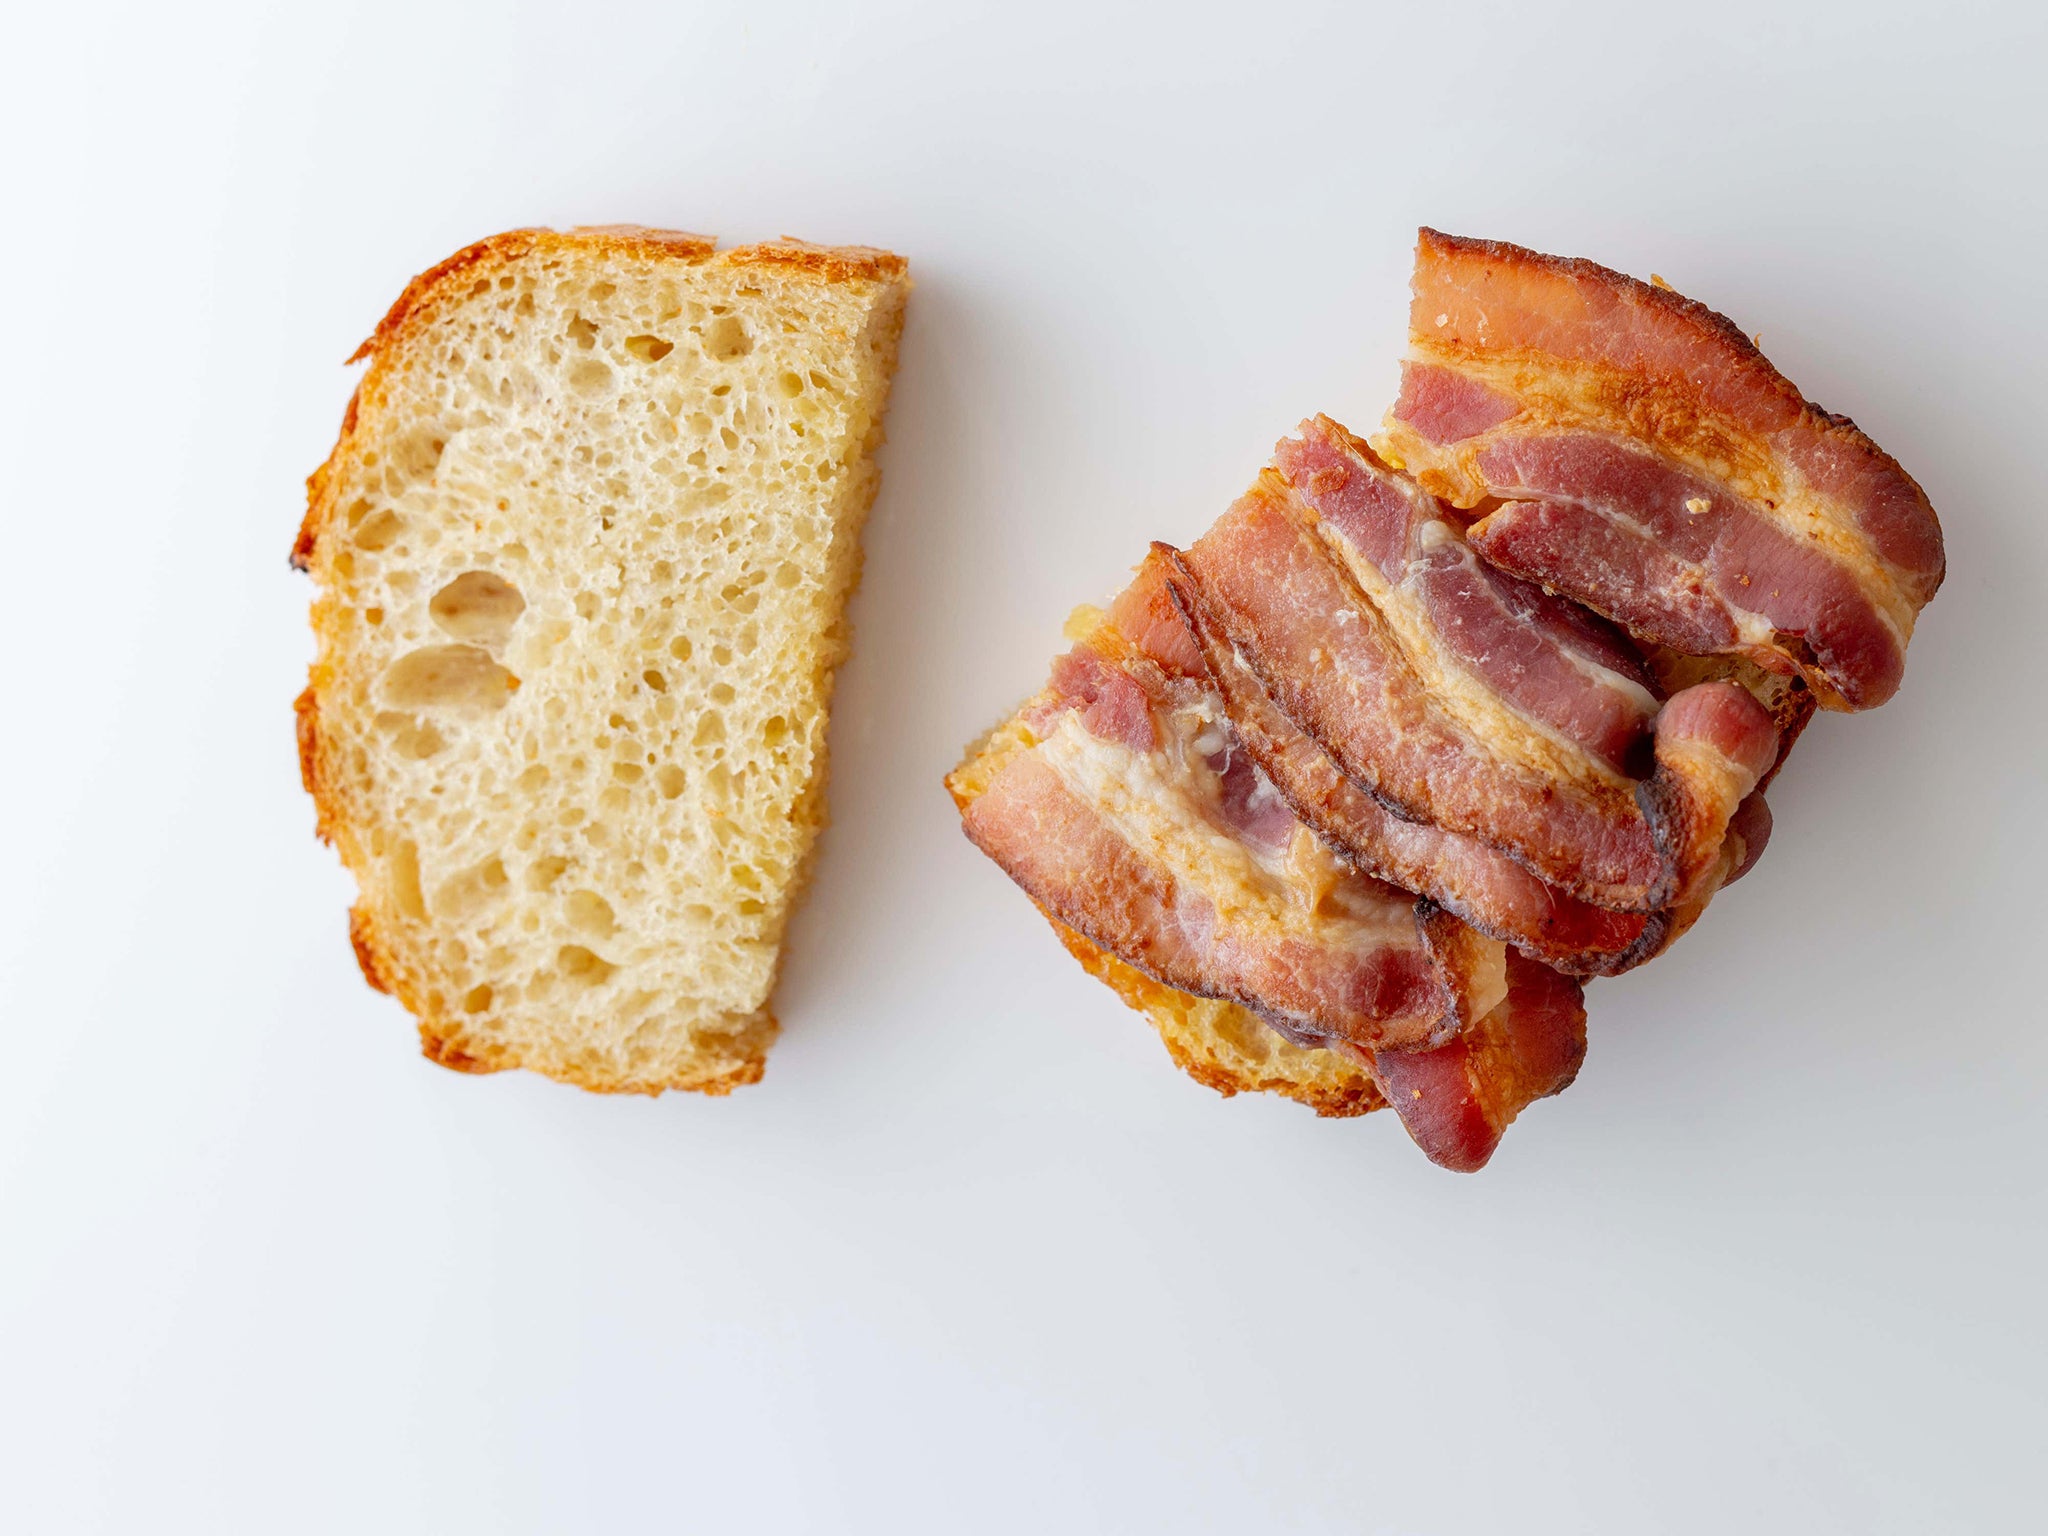 Food preservatives used in sausages and bacon could cause diabetes